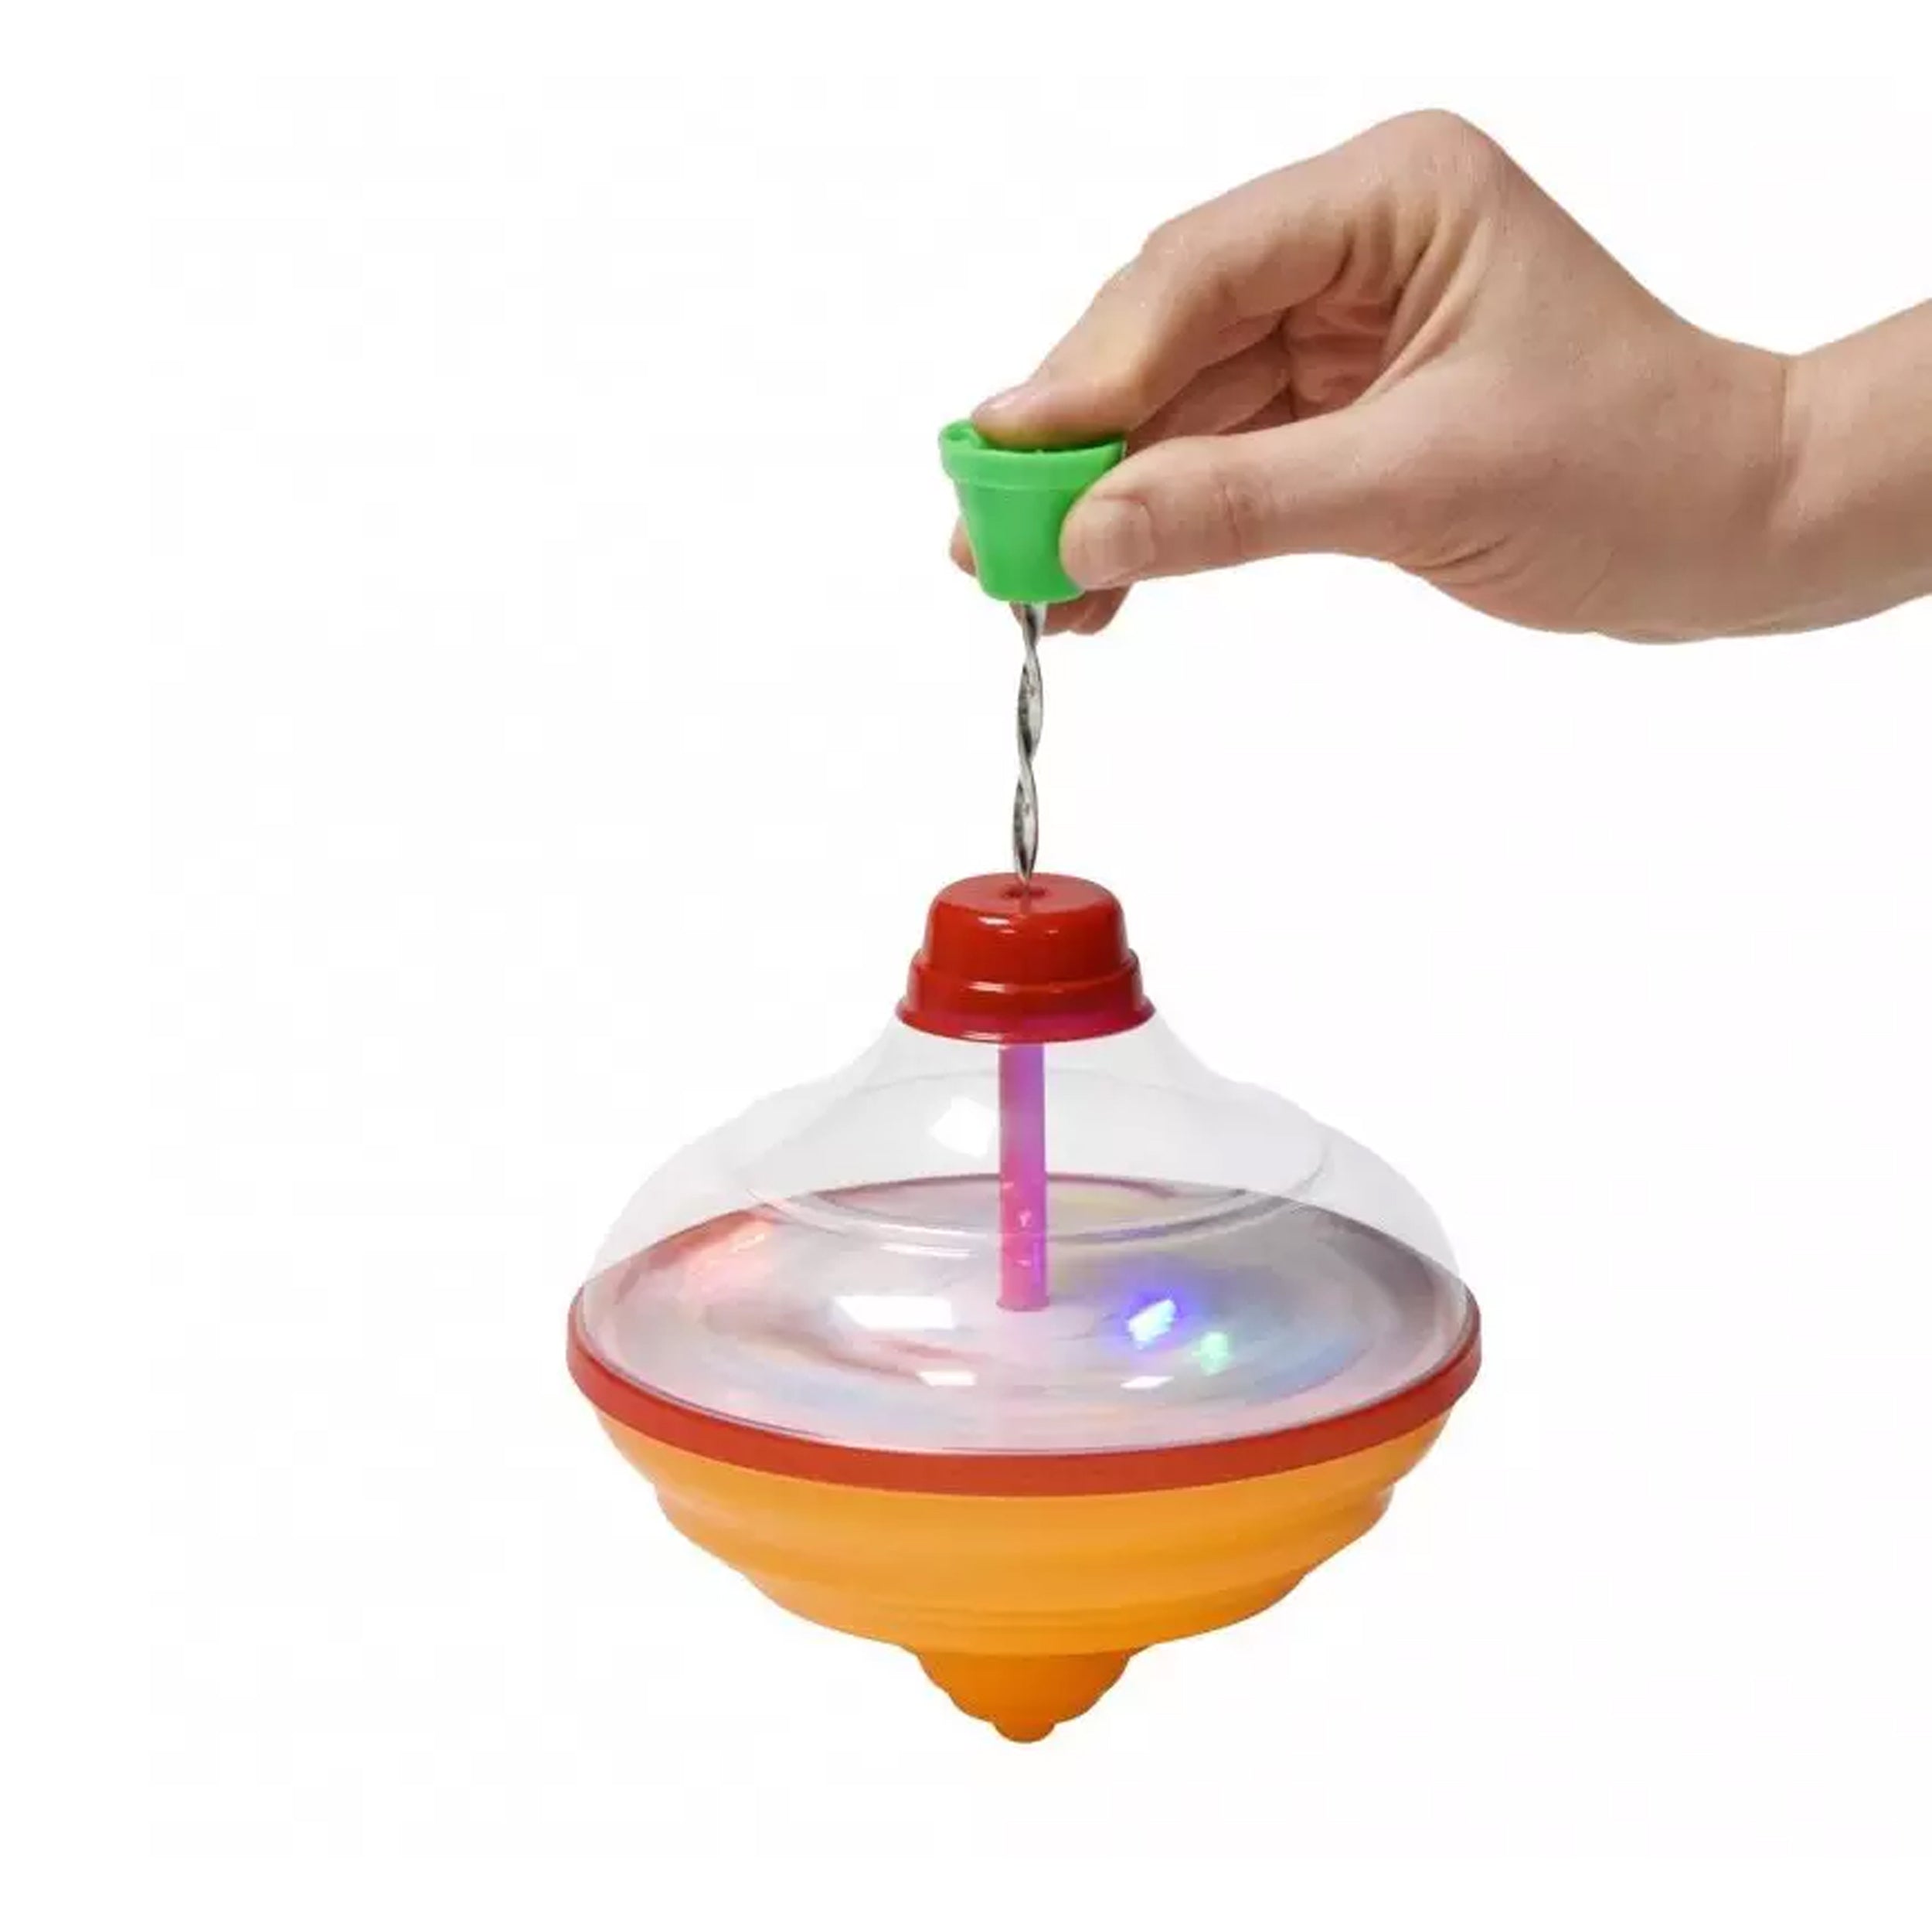 Unique Classic Hand Press Humming Gyro Toy - Experience the Wonder and Amazement of this Classic Toy